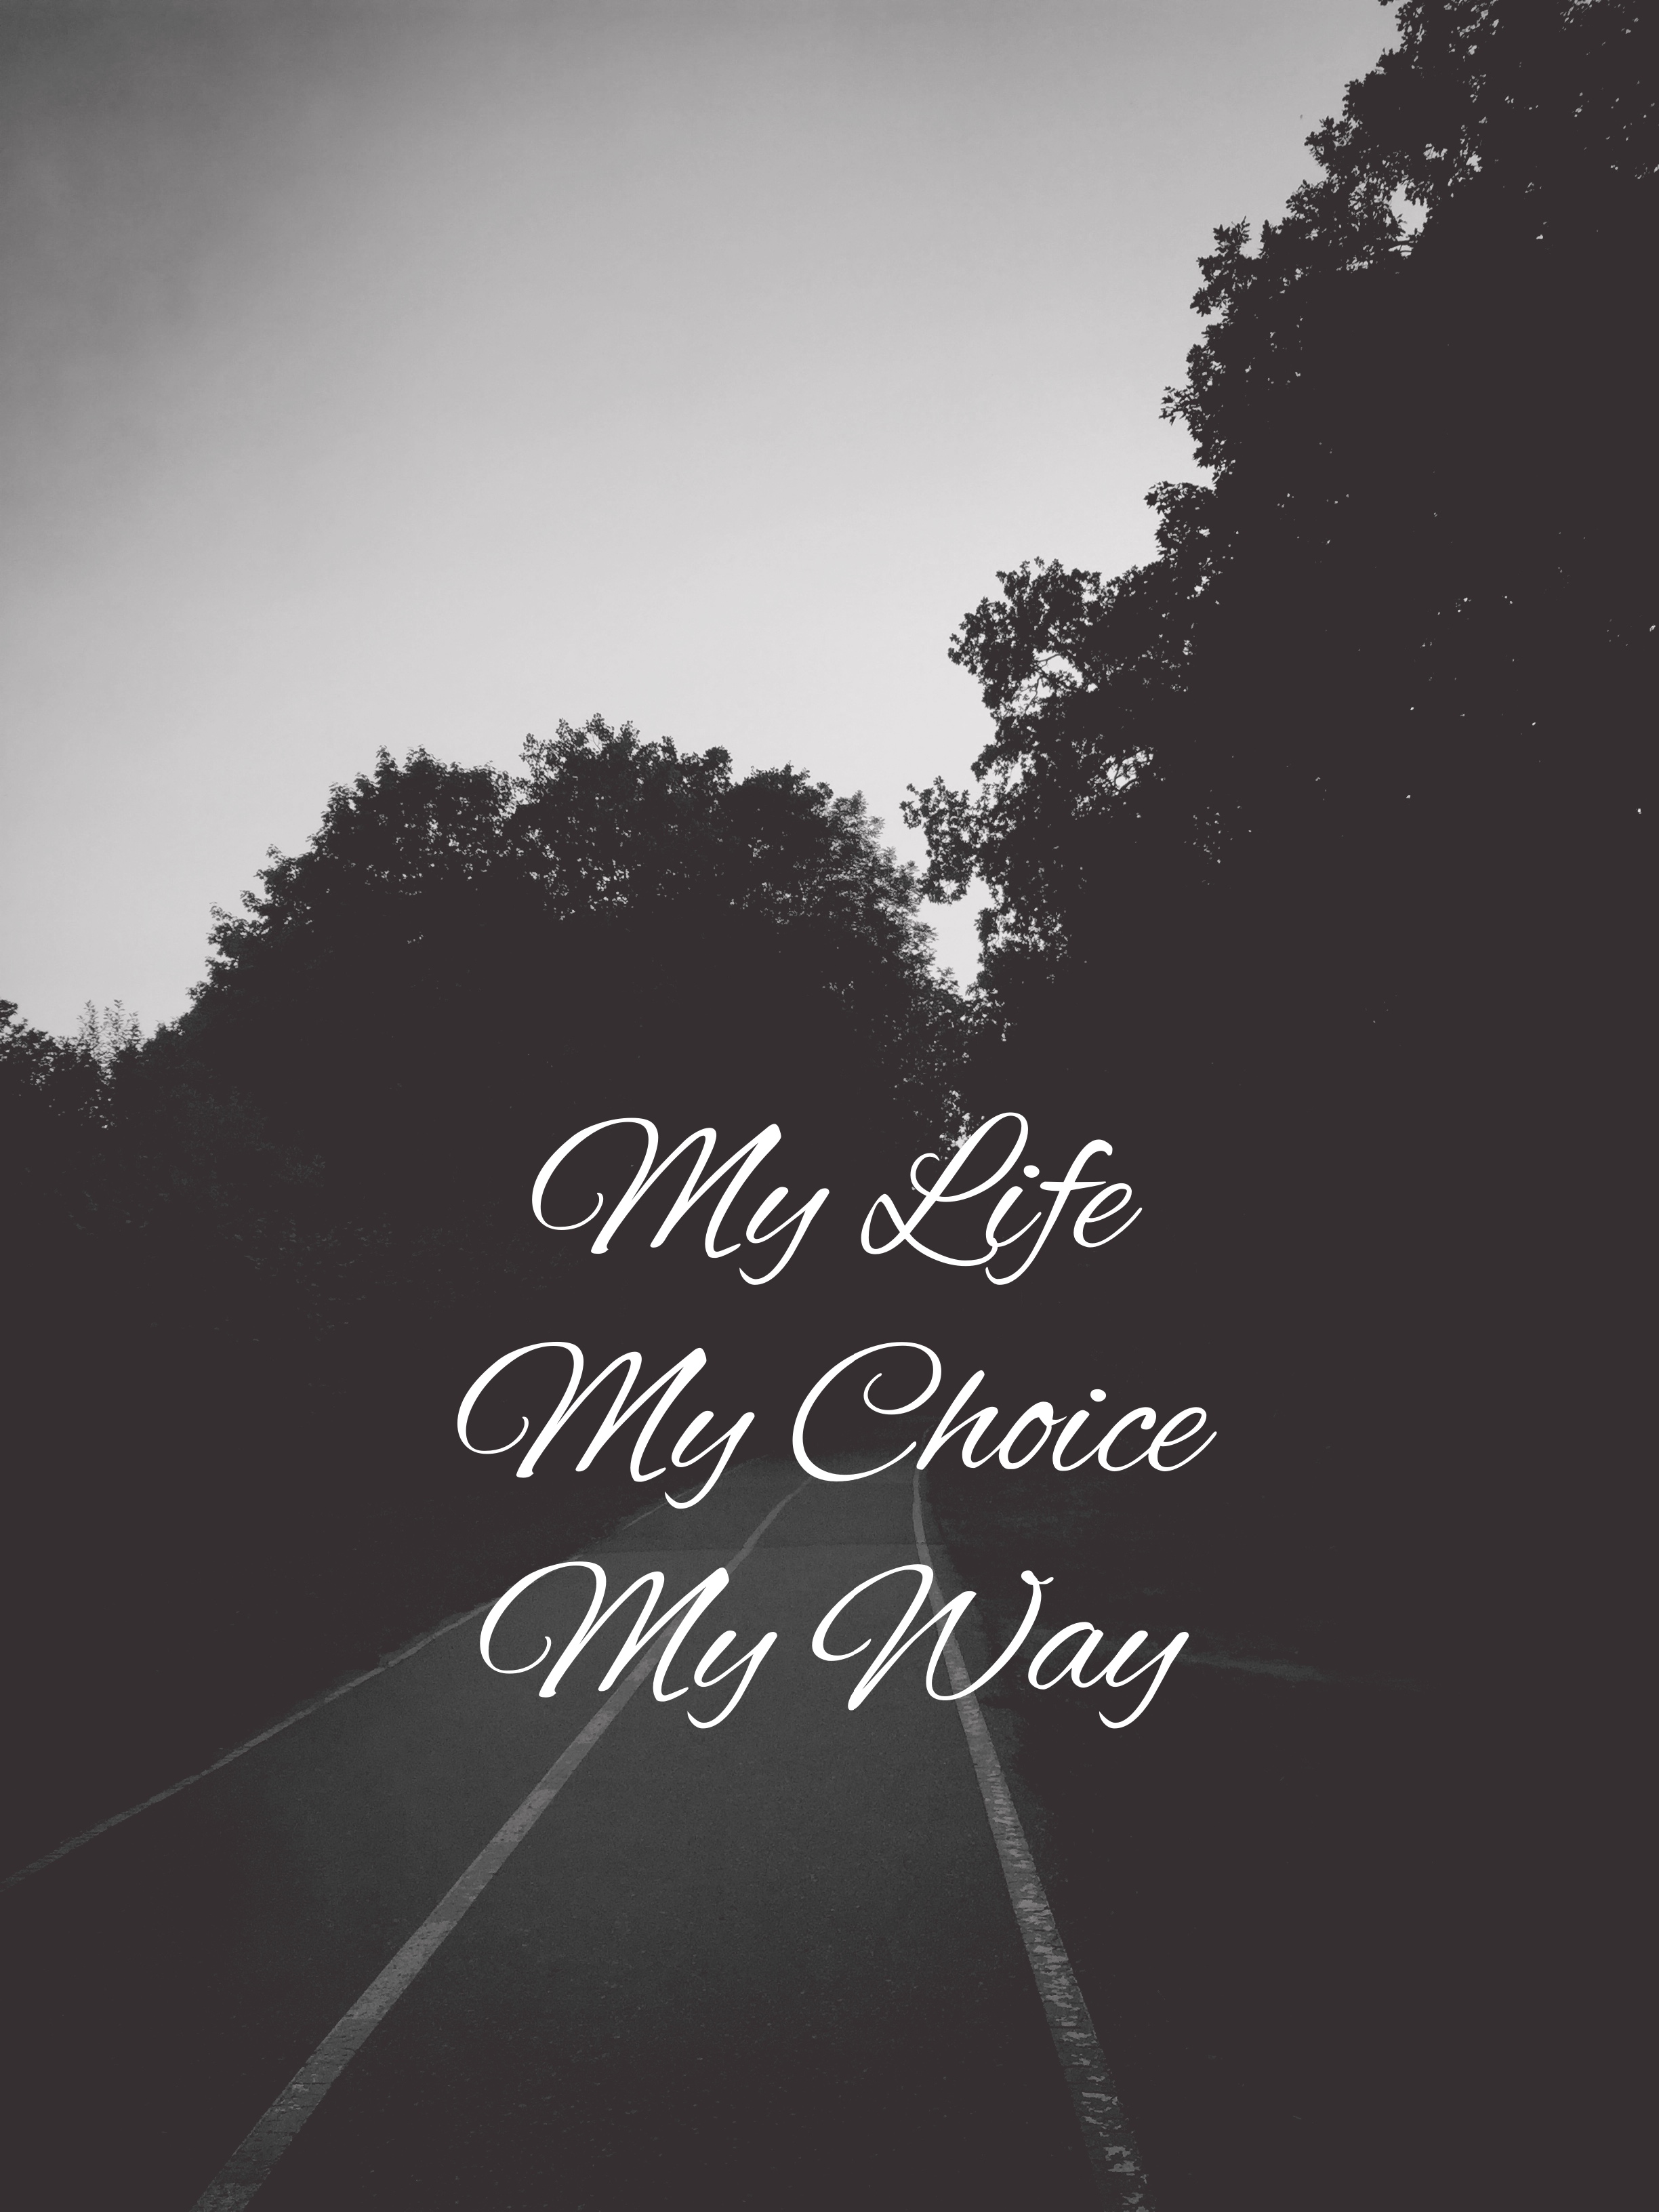 quotation, words, text, bw, quote, chb, inscription, road, path, way